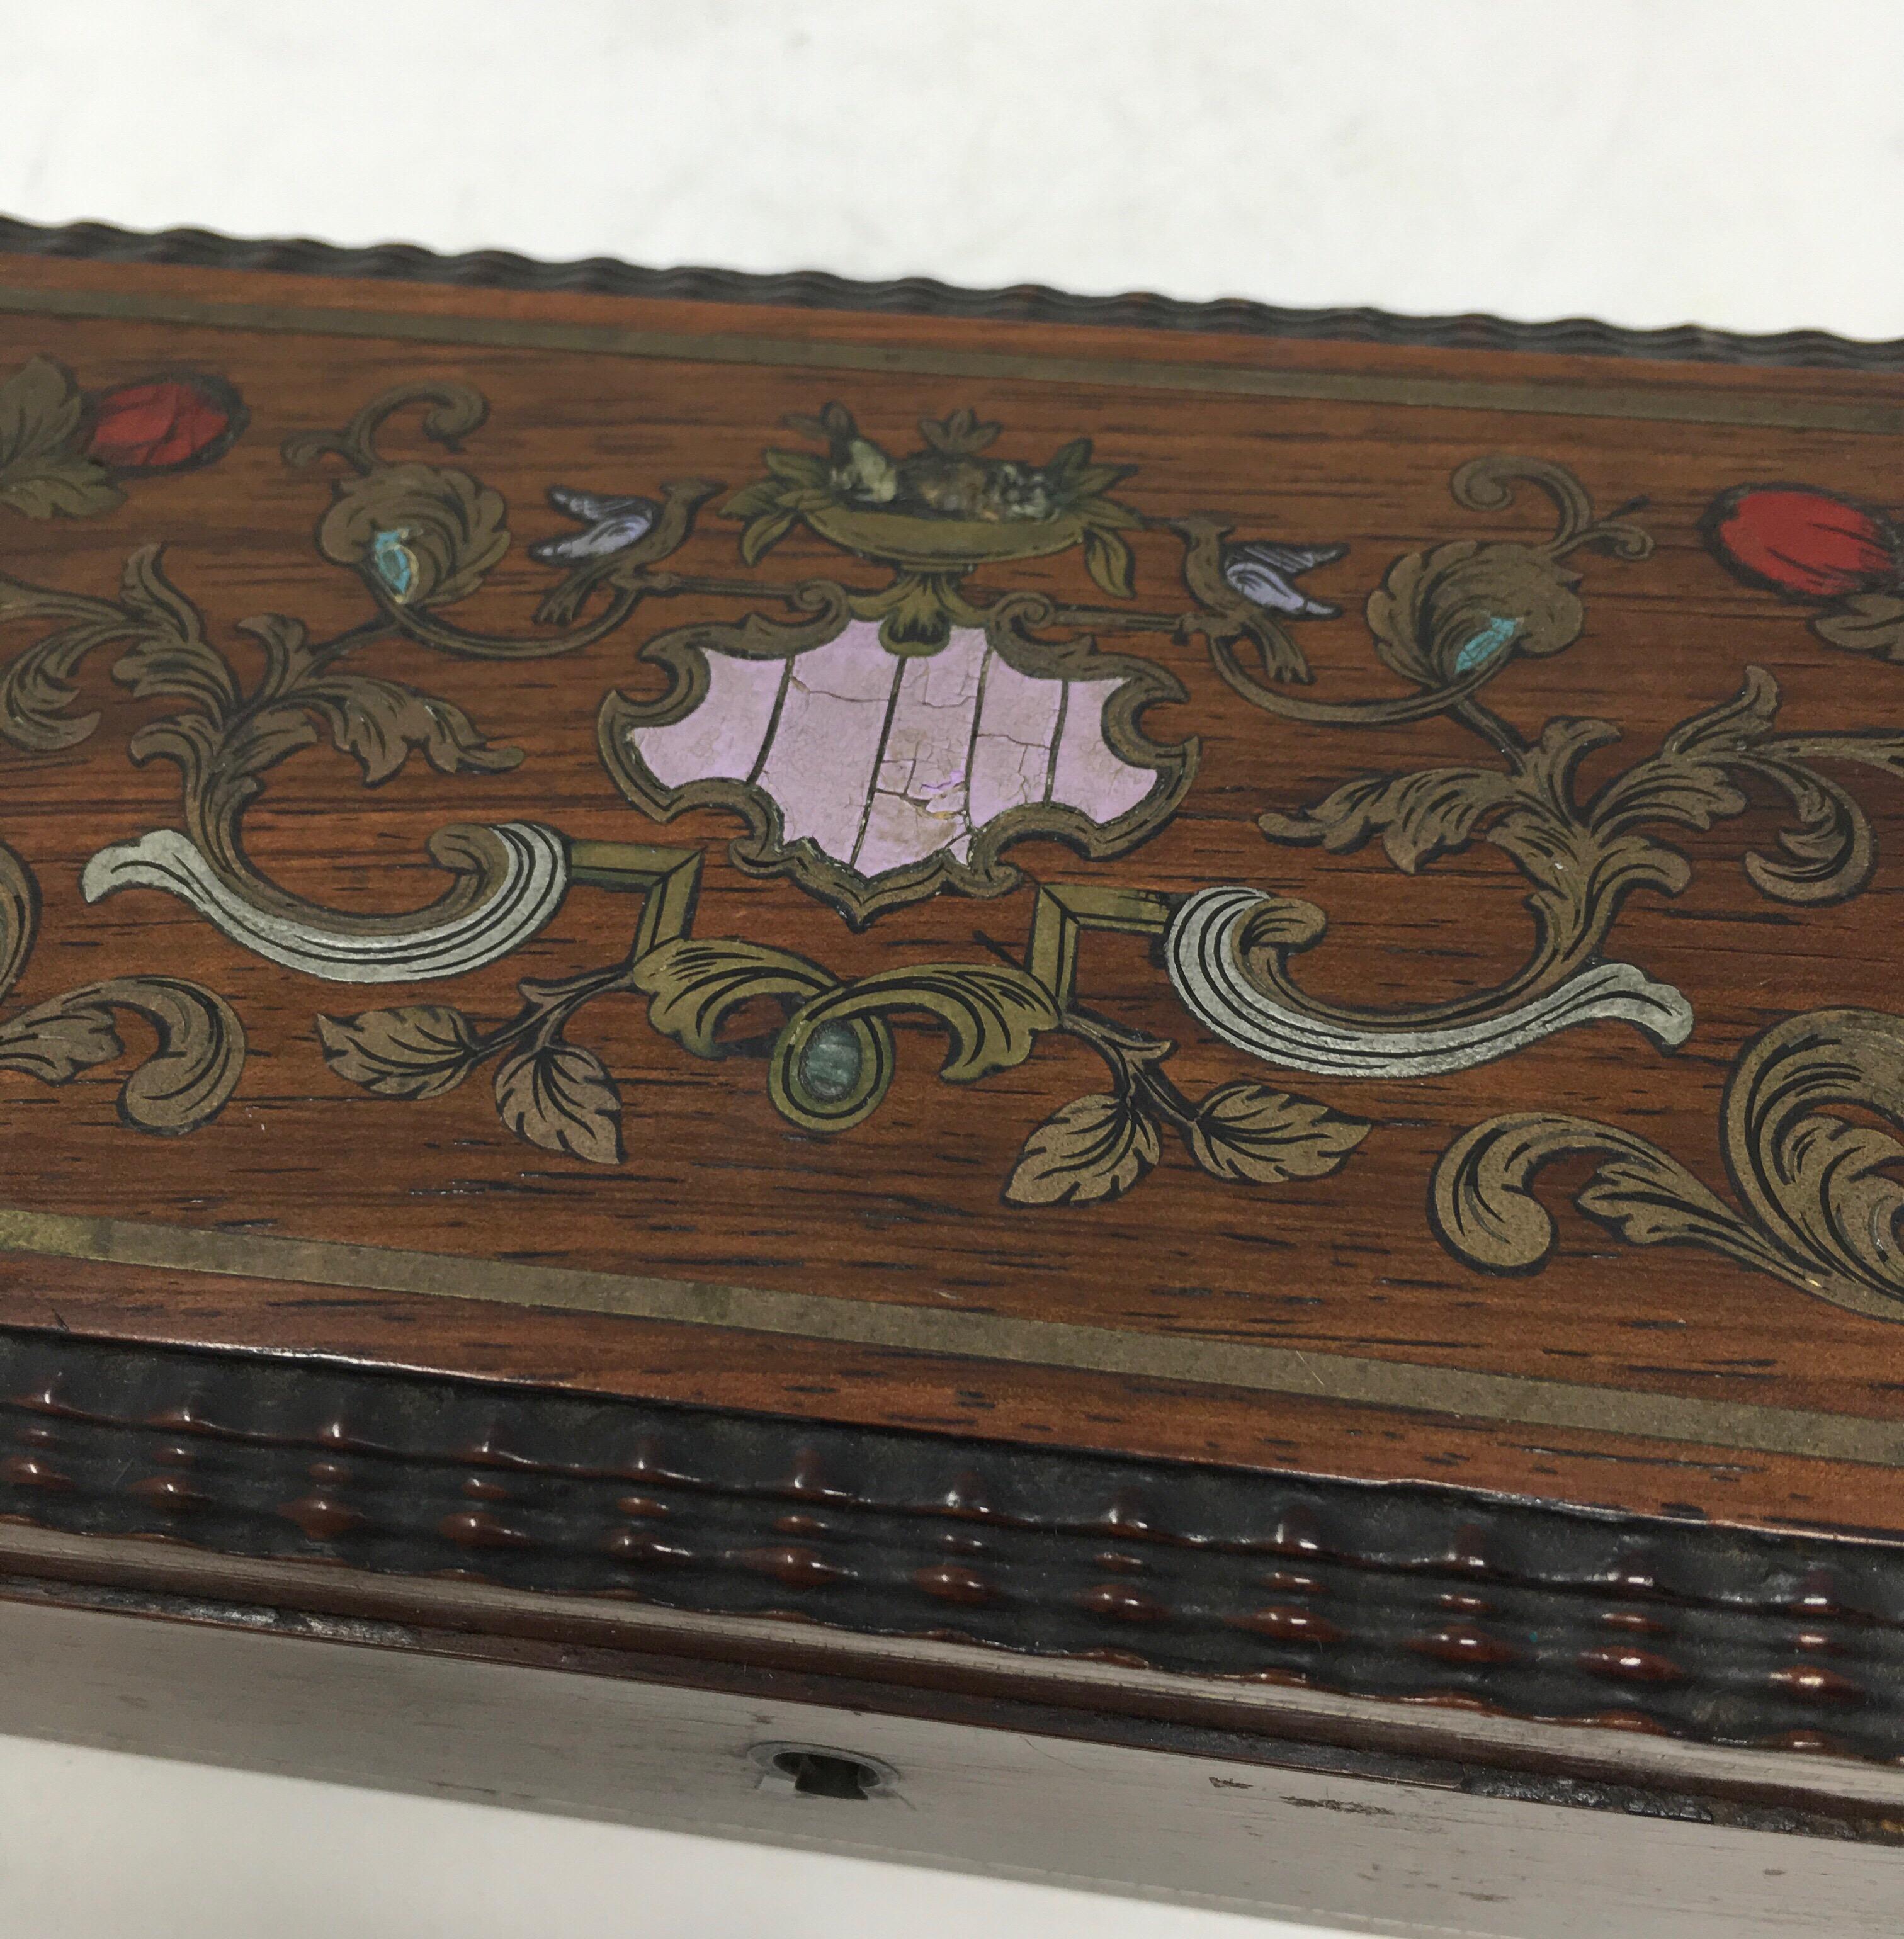 Decorative inlay wooden box. The box is lined with a blue satin material. No further markings.